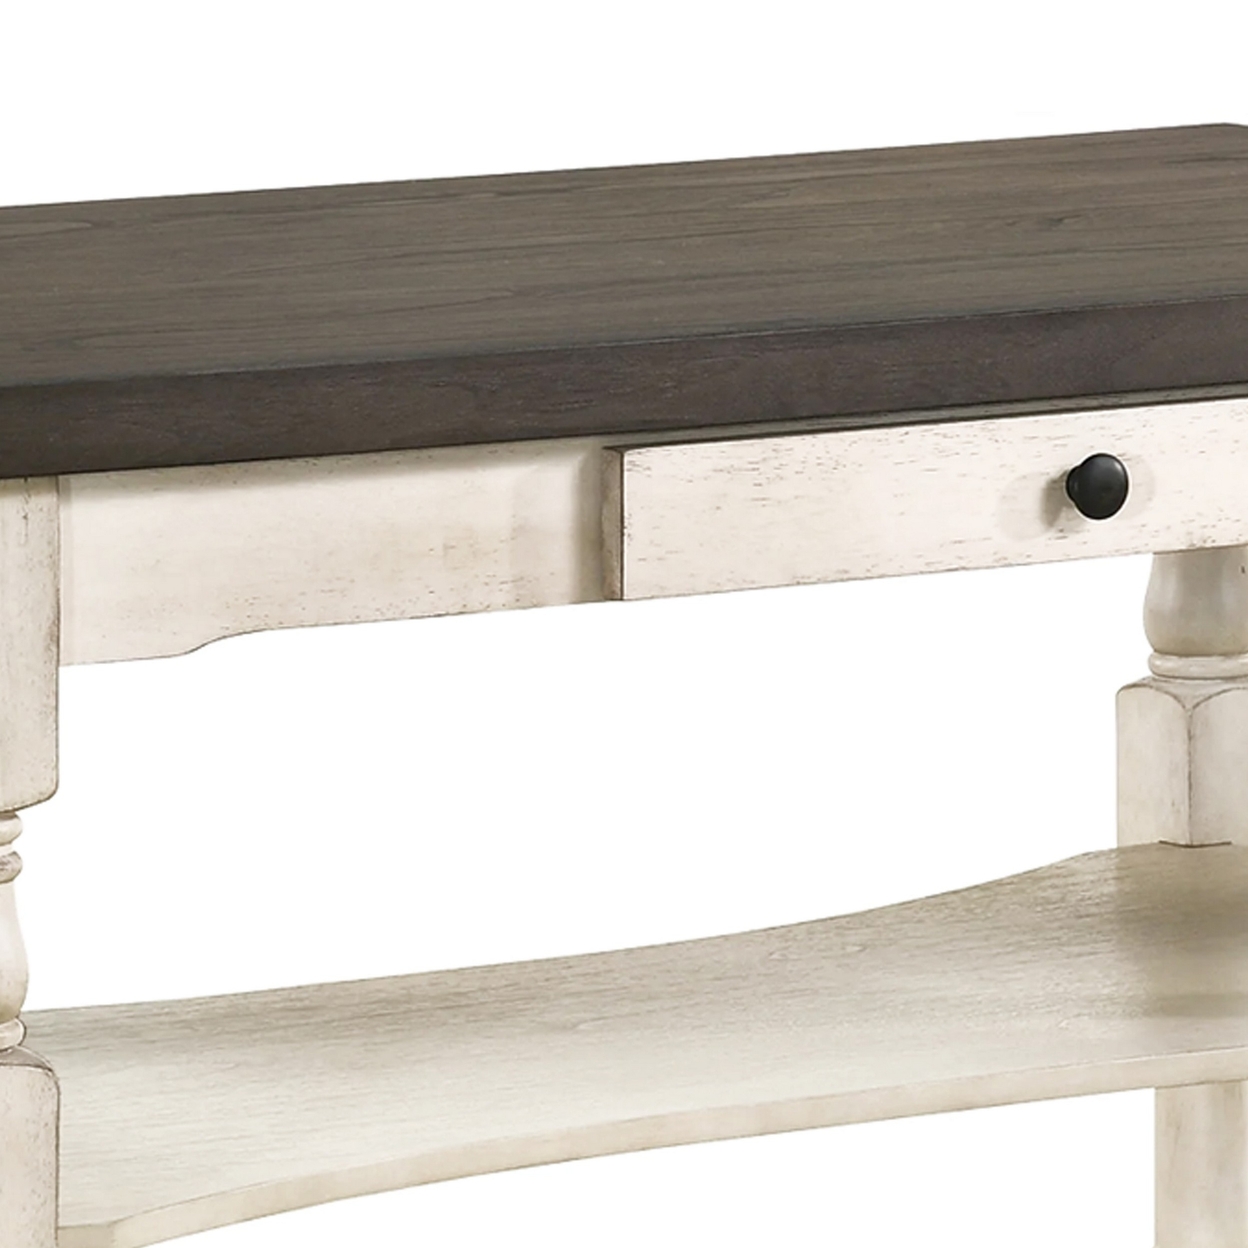 Swan 60 Inch Counter Height Table, Gray Surface, Turned Legs, Ivory Wood- Saltoro Sherpi